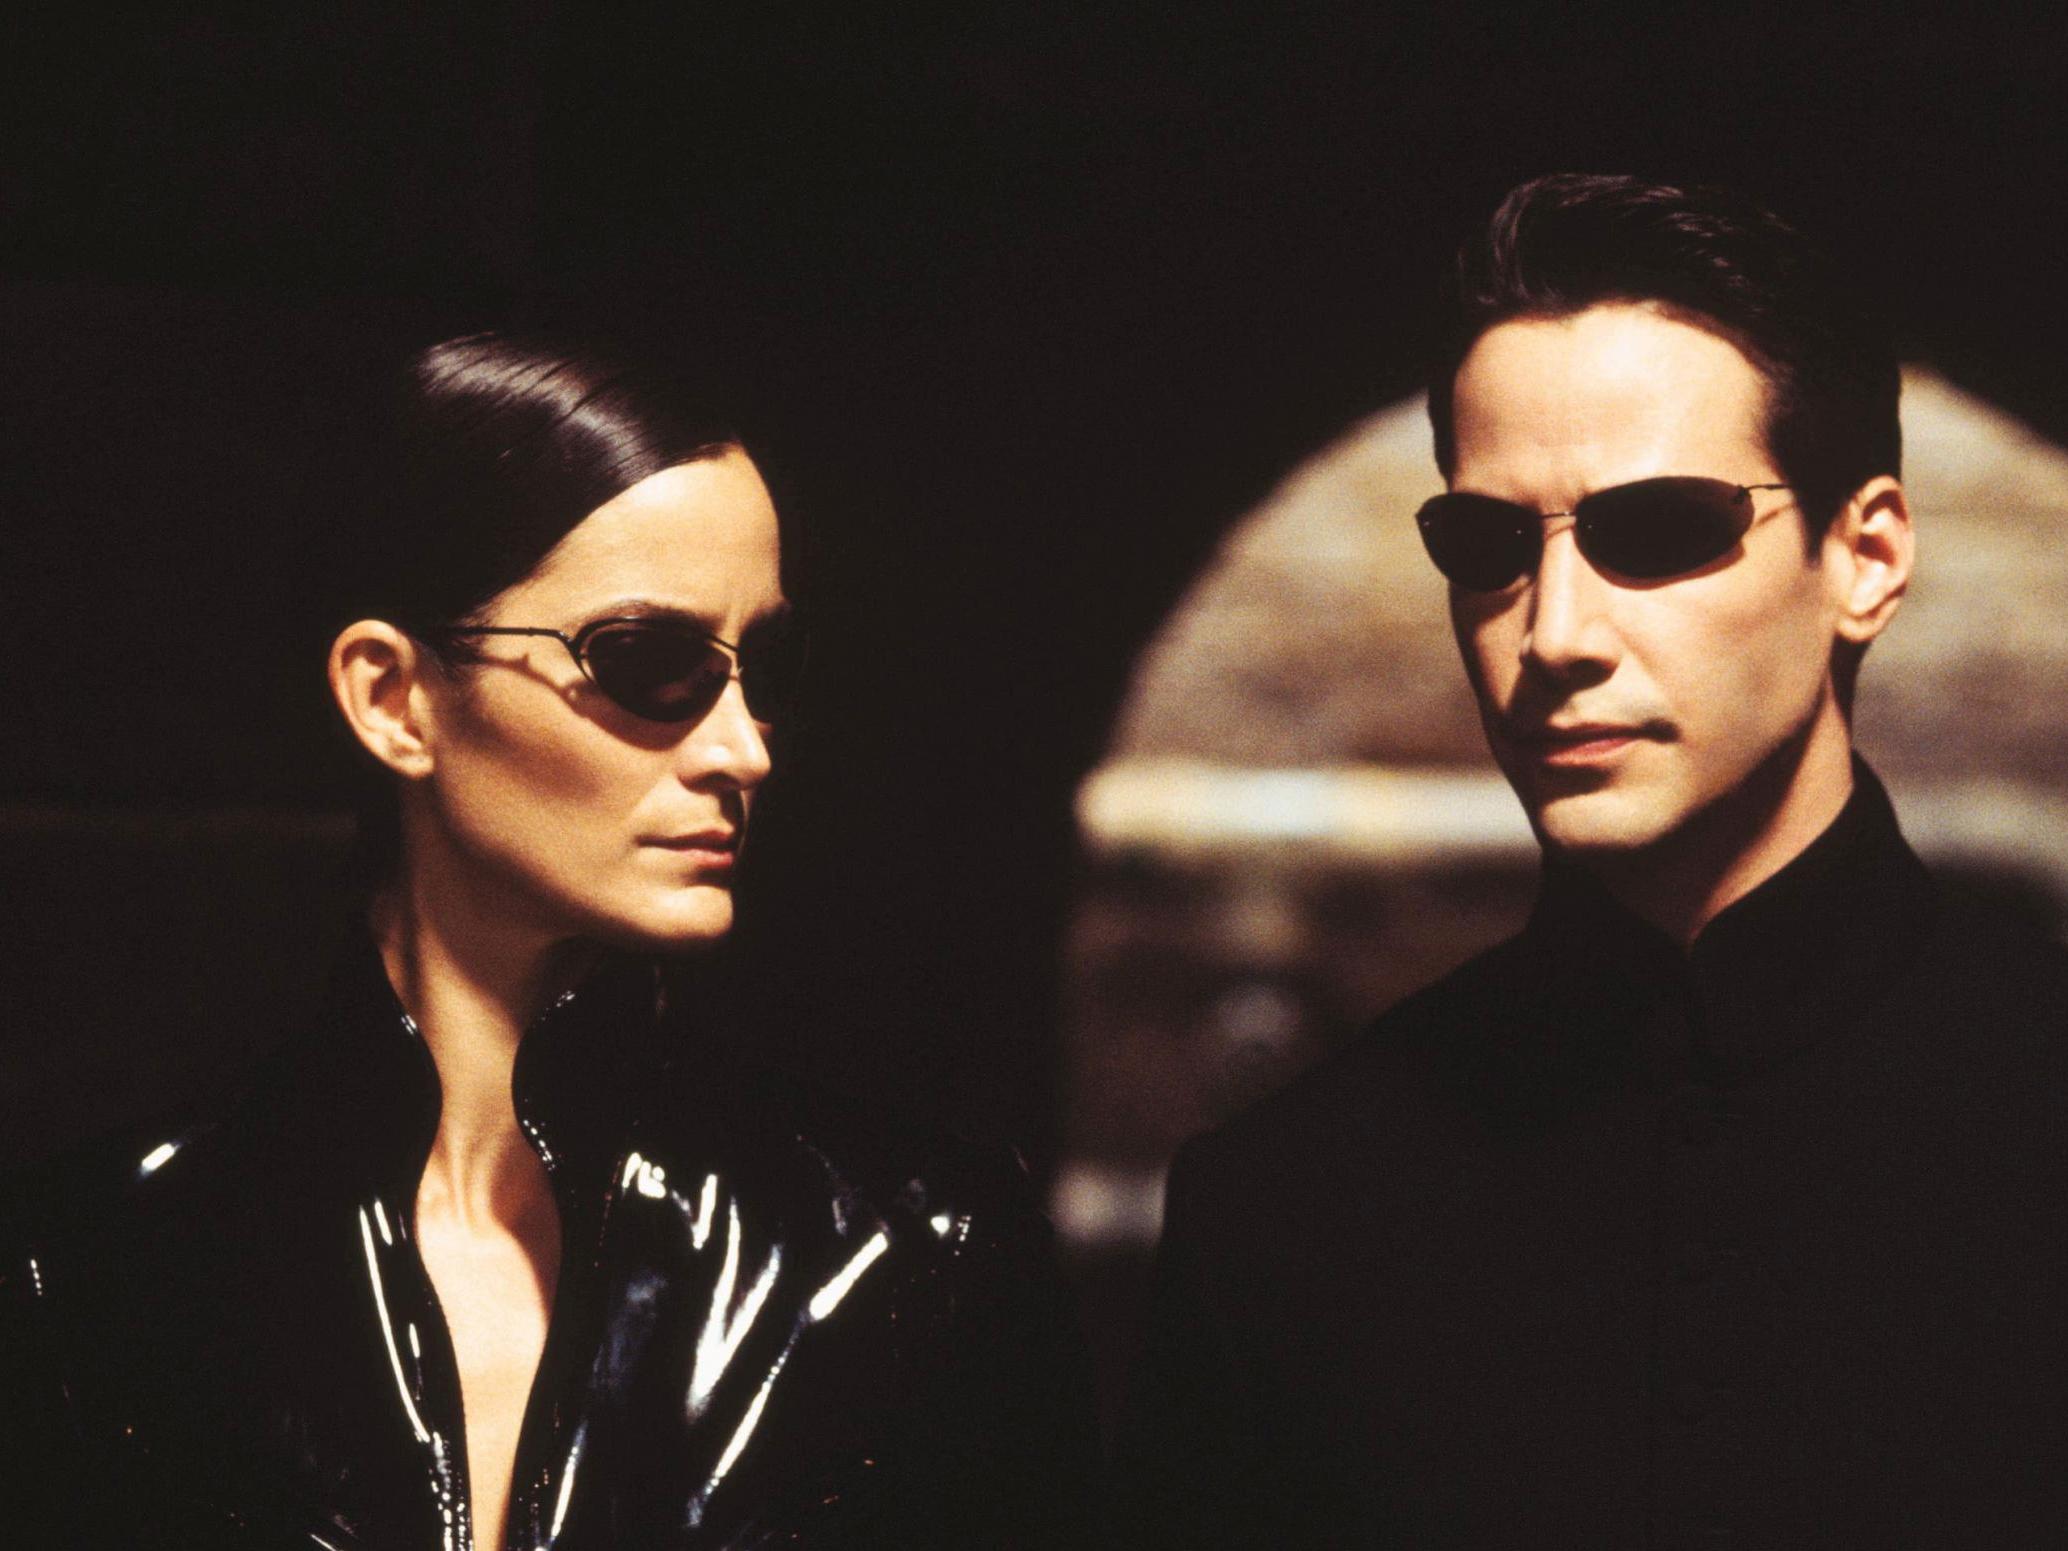 Carrie-Anne Moss and Keanu Reeves in ‘The Matrix’